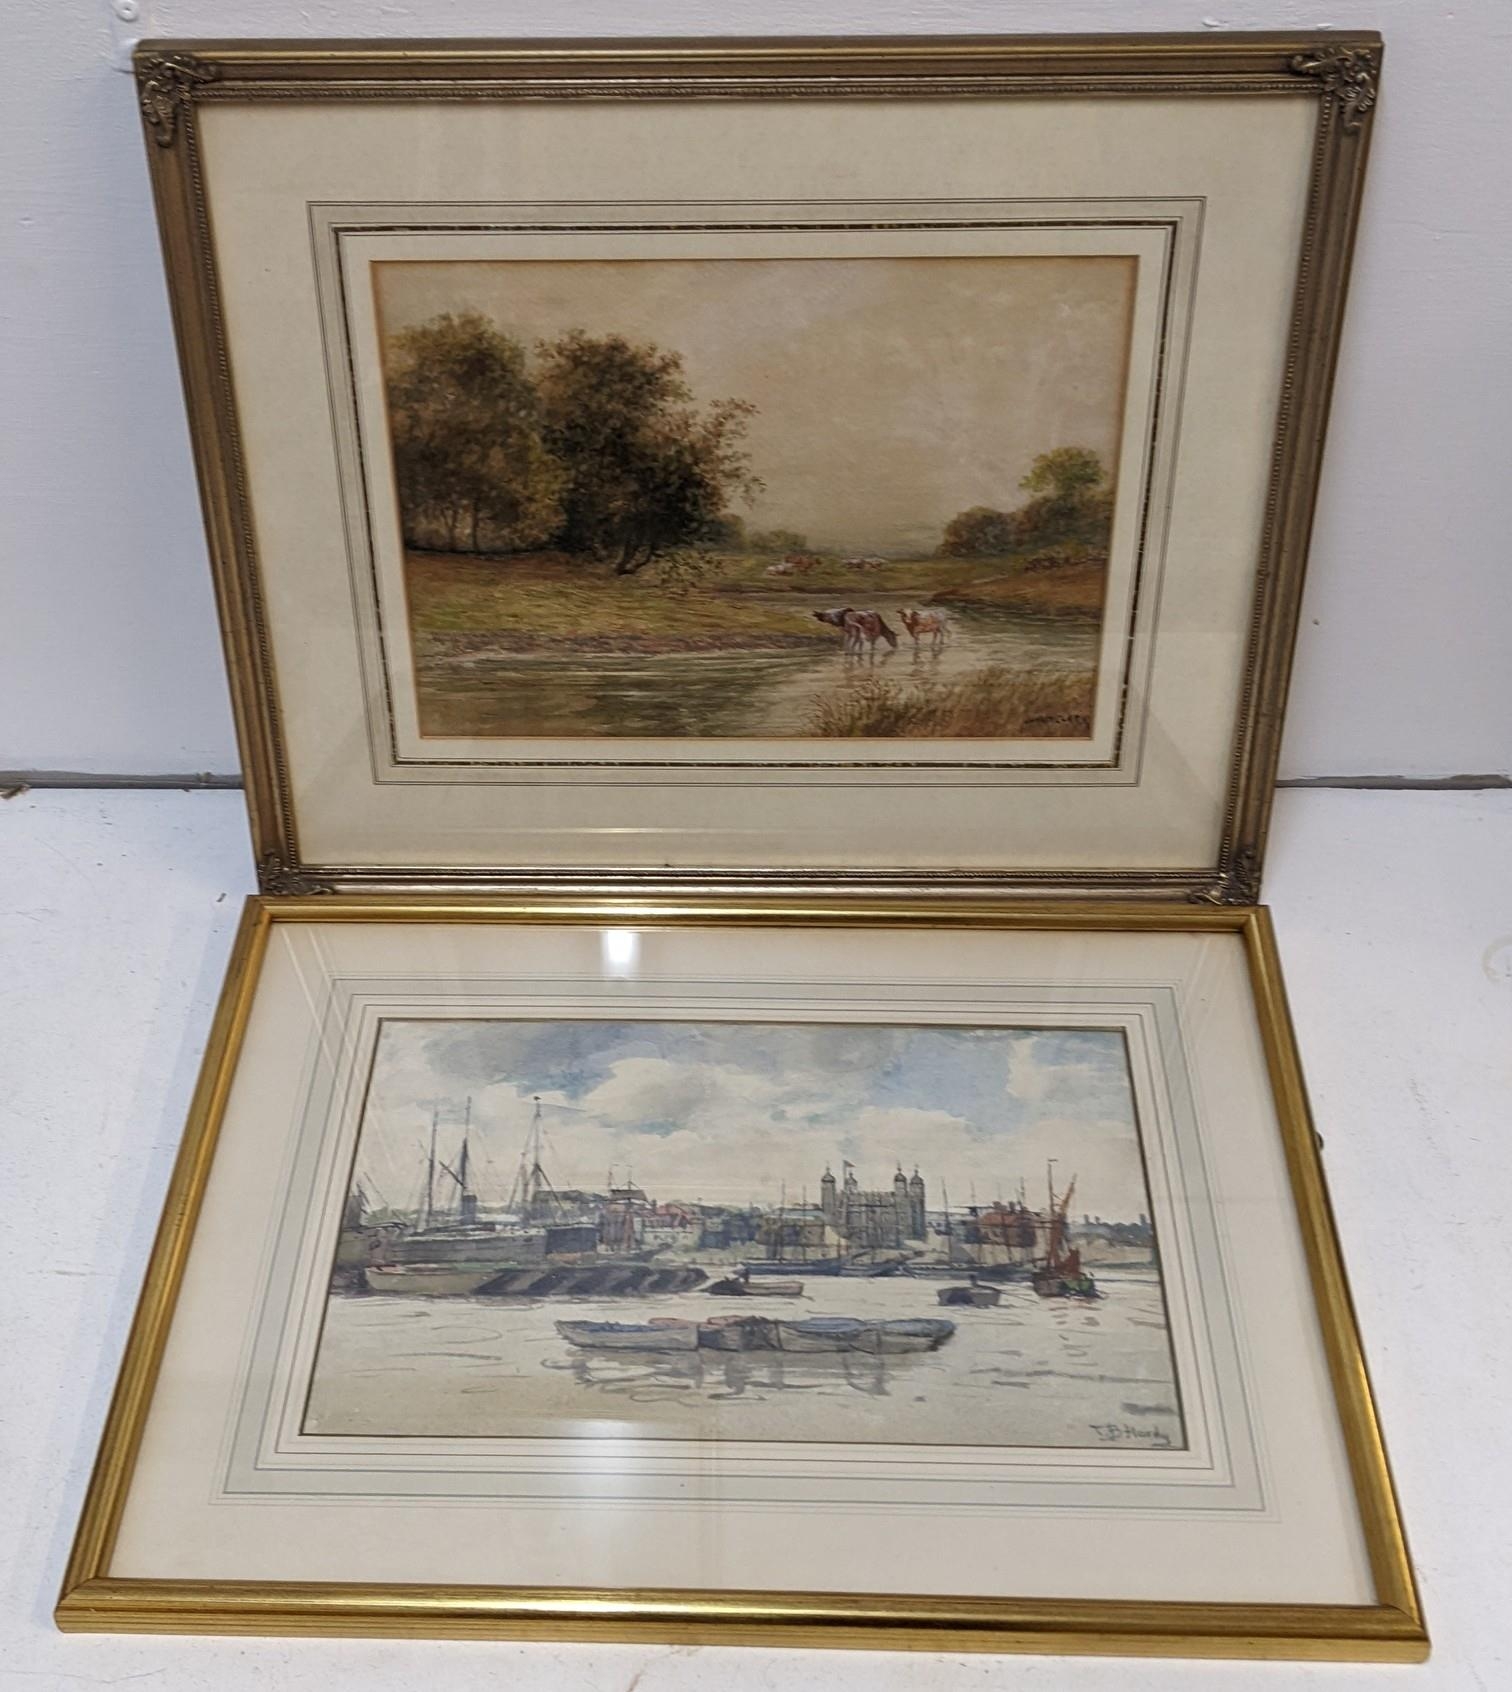 Attributed to Thomas Bush Hardy, 'A view of the Thames with boats' watercolour signed and J Wait